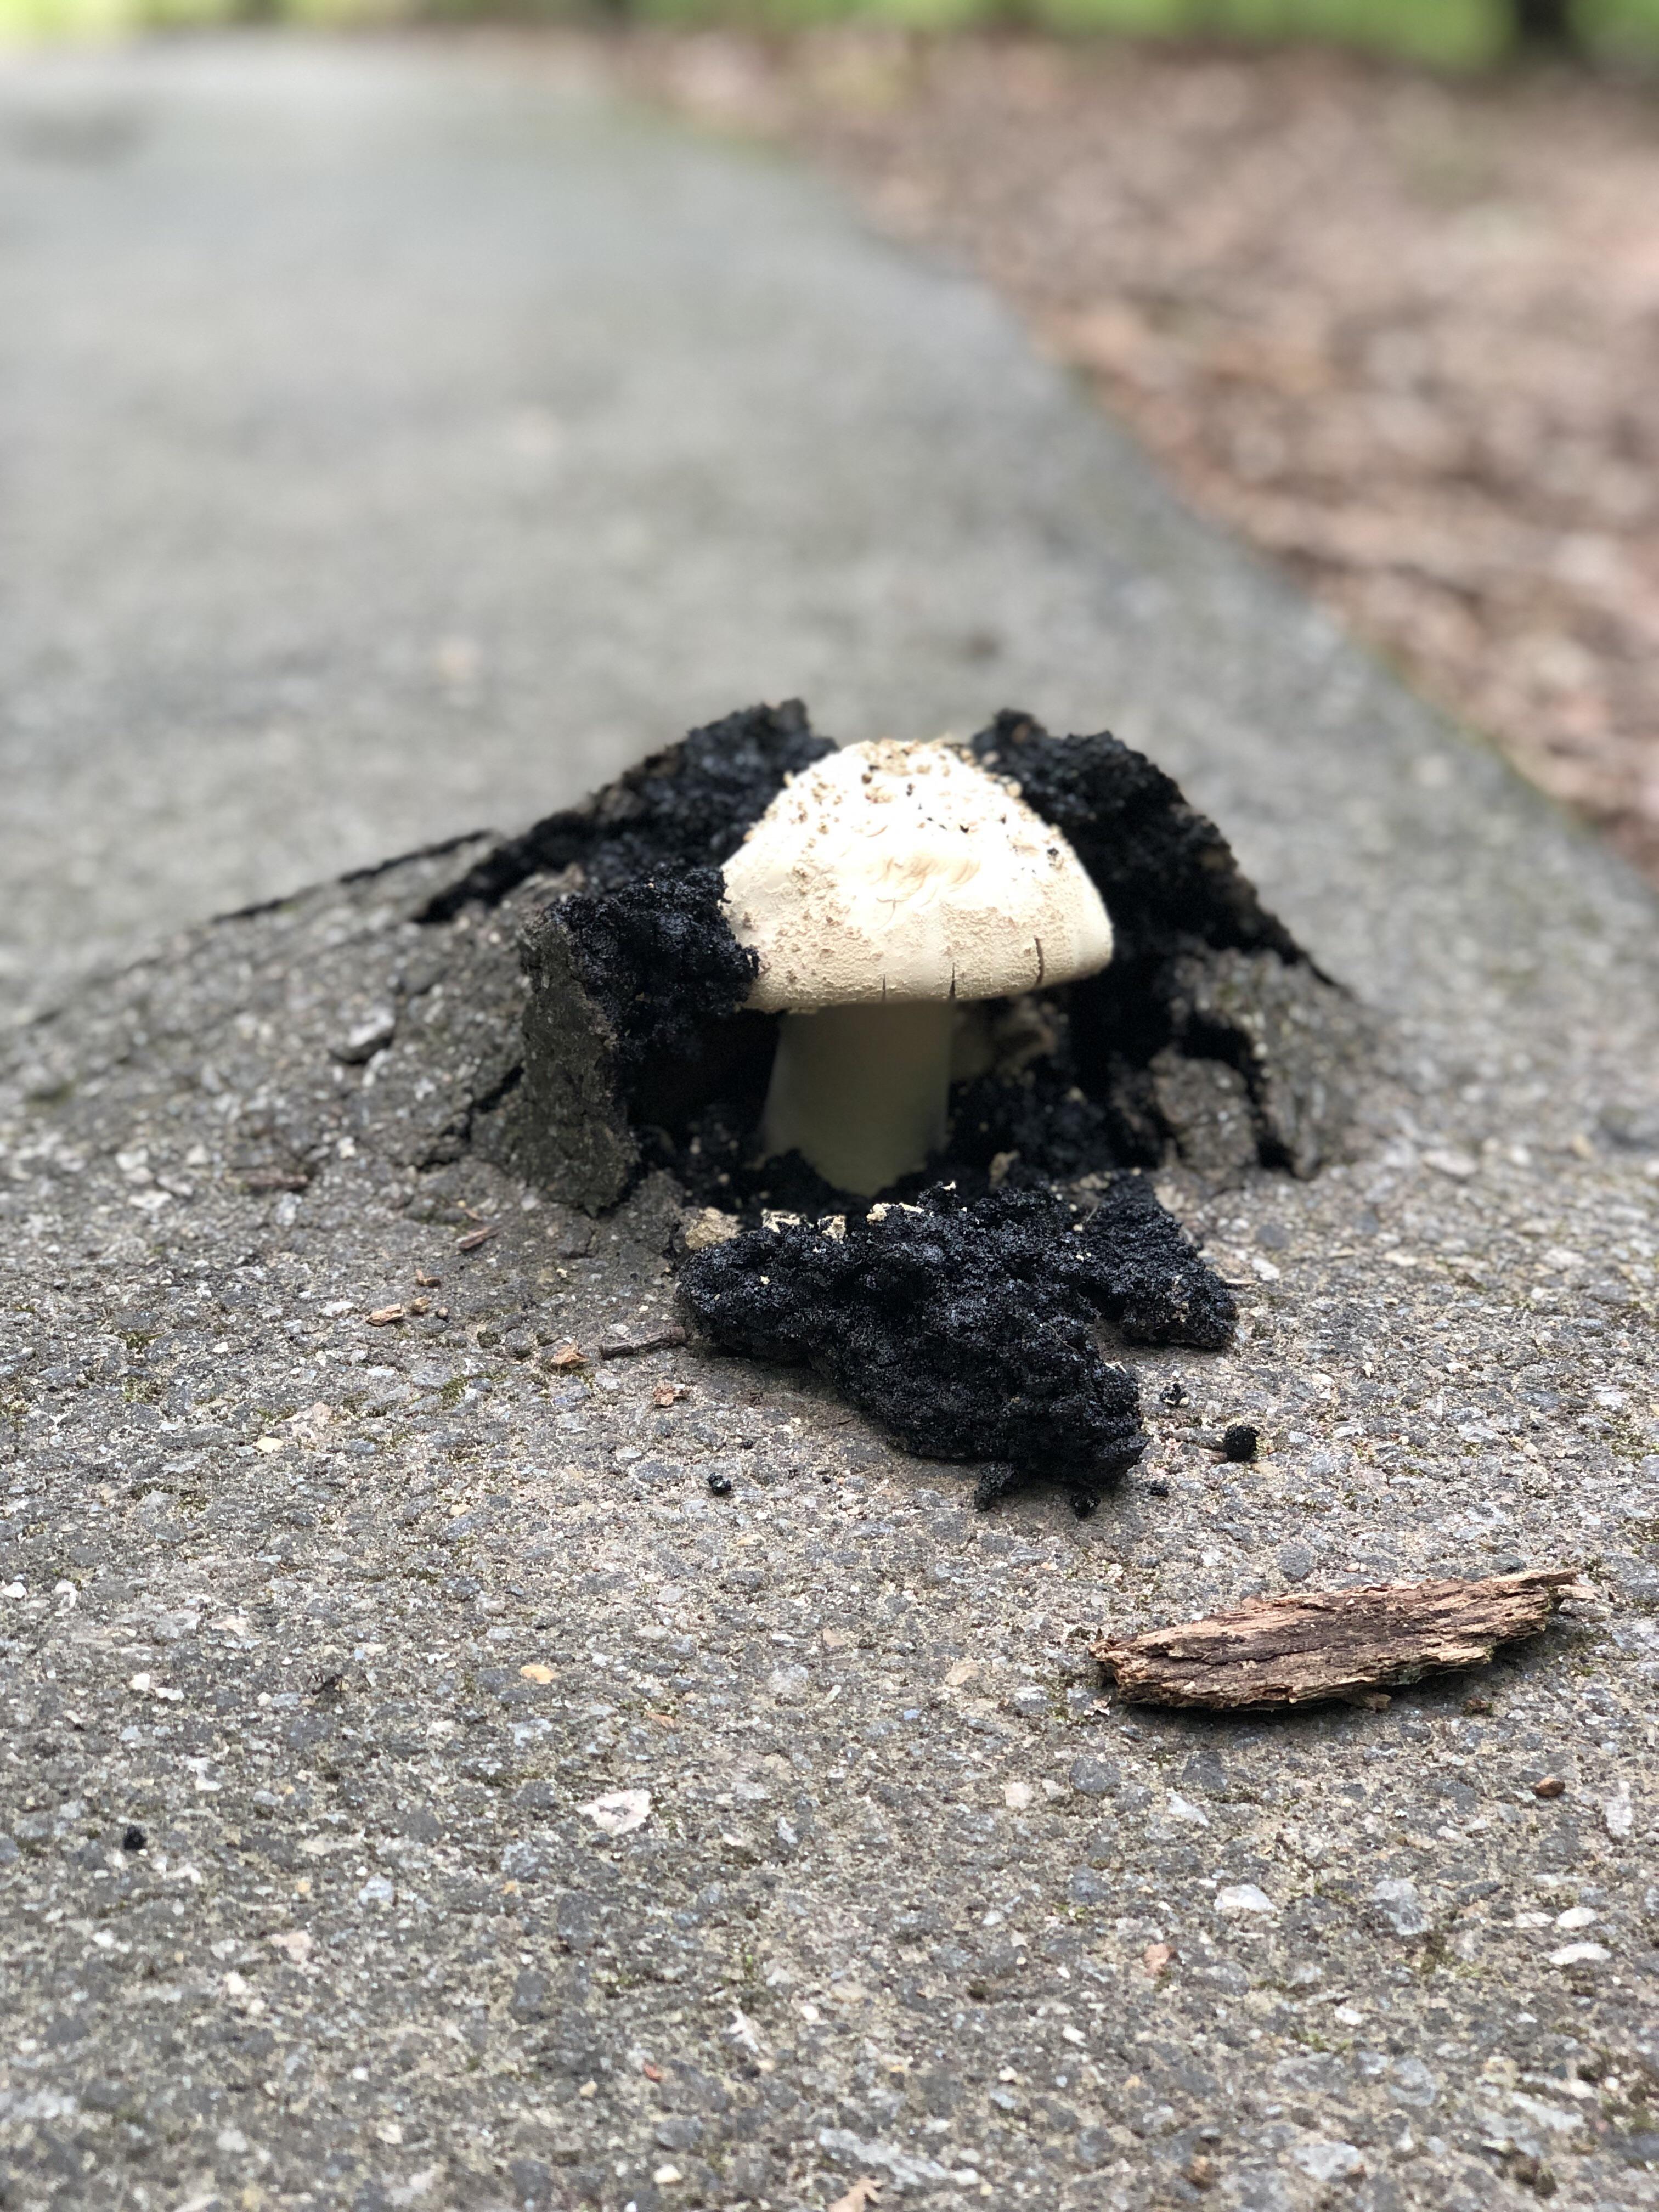 Turns out mushrooms don't give a damn about your asphalt.